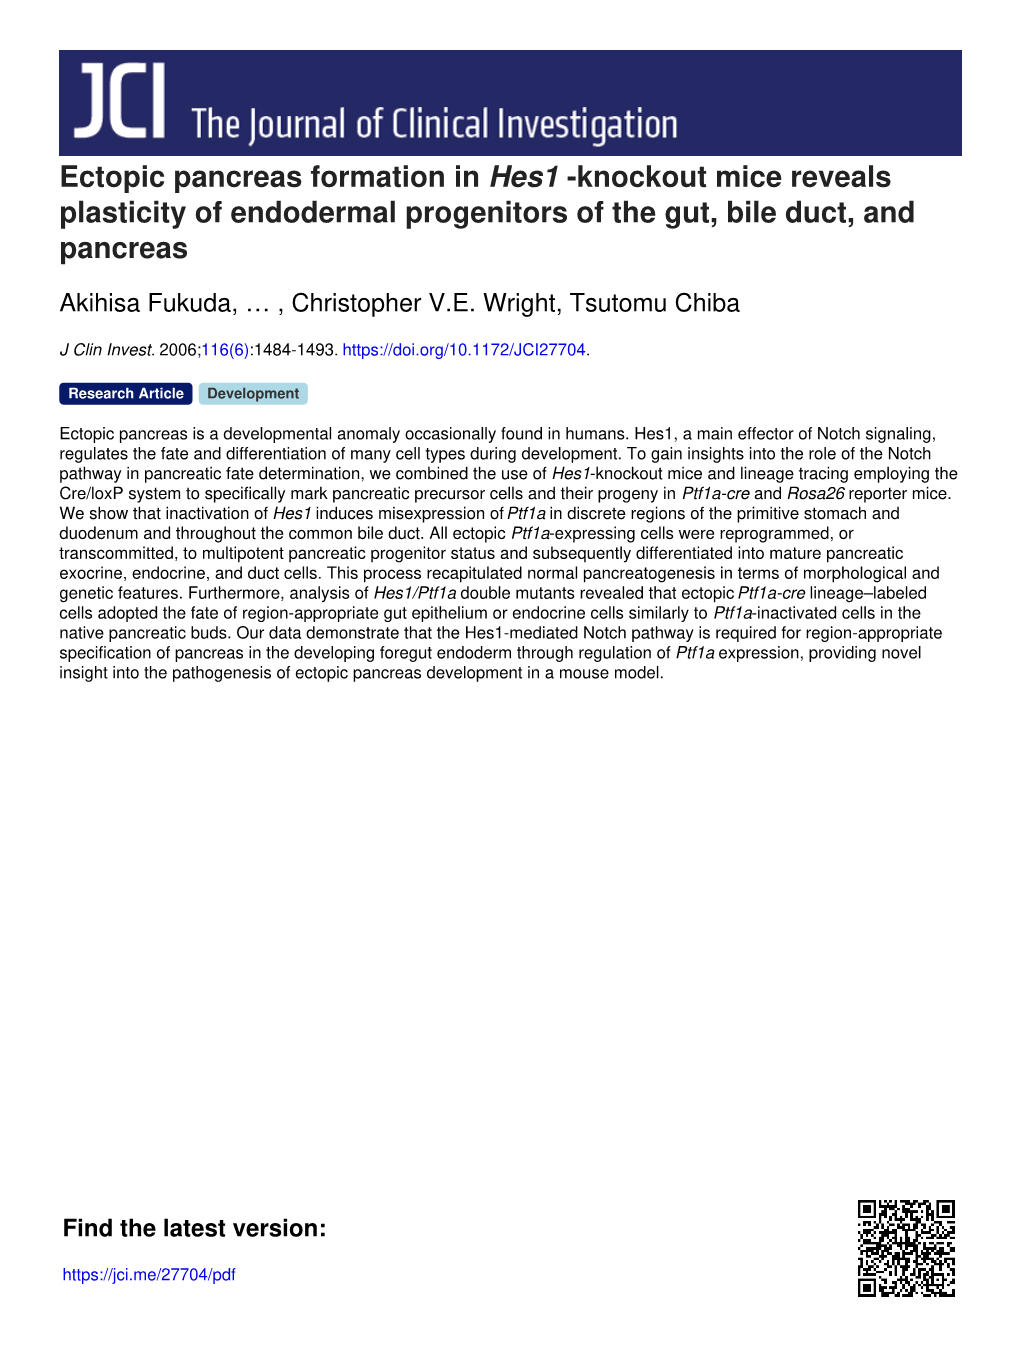 Ectopic Pancreas Formation in Hes1 -Knockout Mice Reveals Plasticity of Endodermal Progenitors of the Gut, Bile Duct, and Pancreas